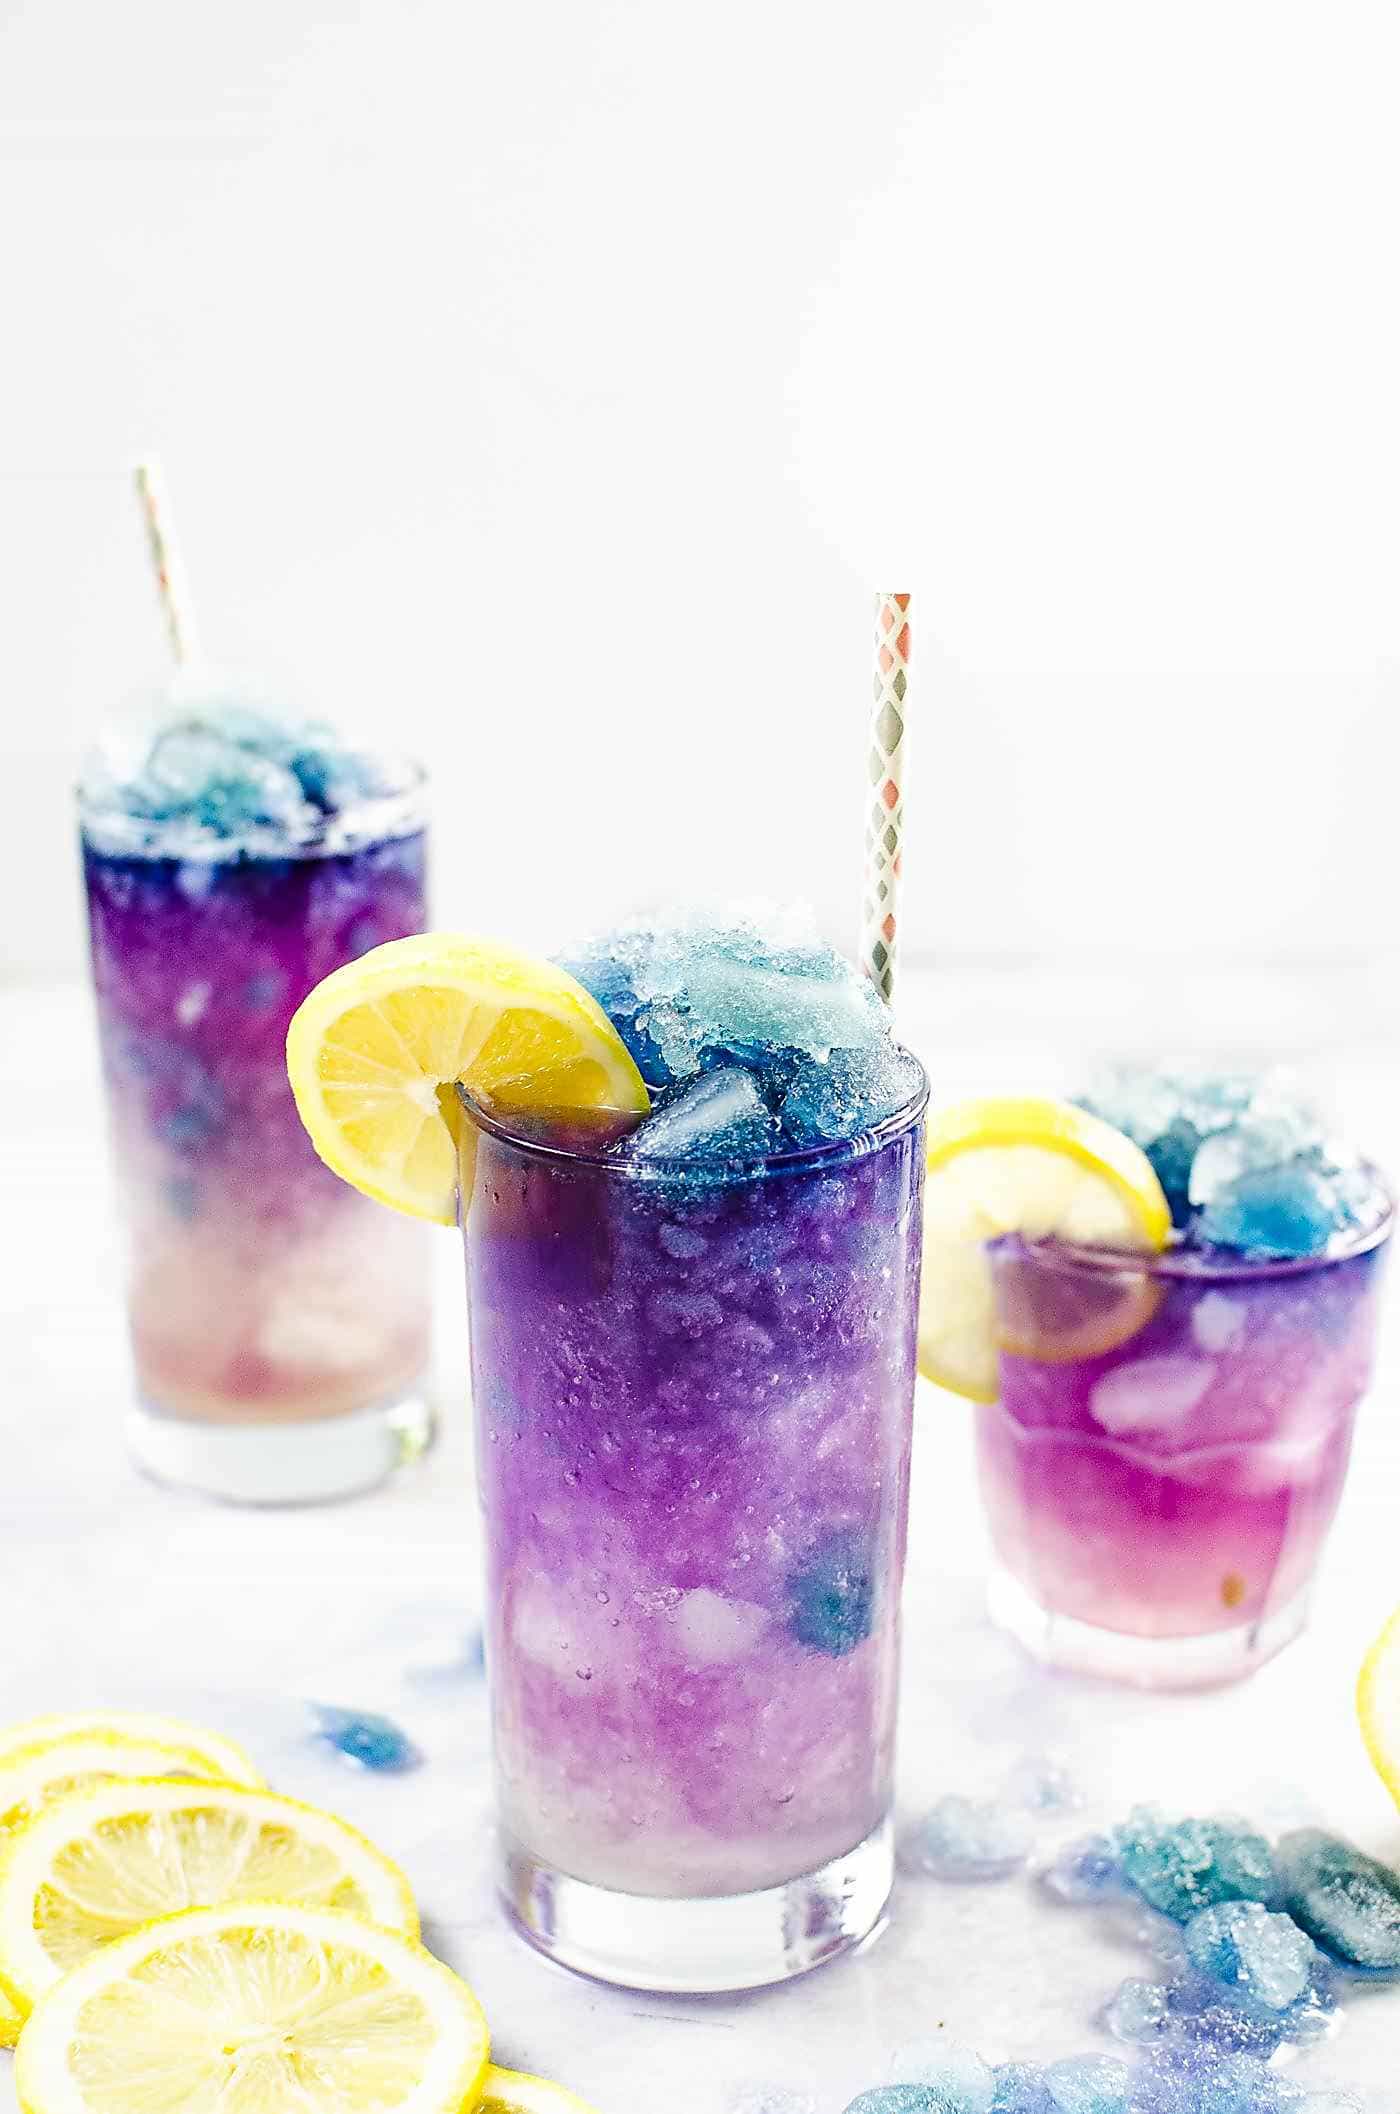 4 low calorie summer drinks you must try